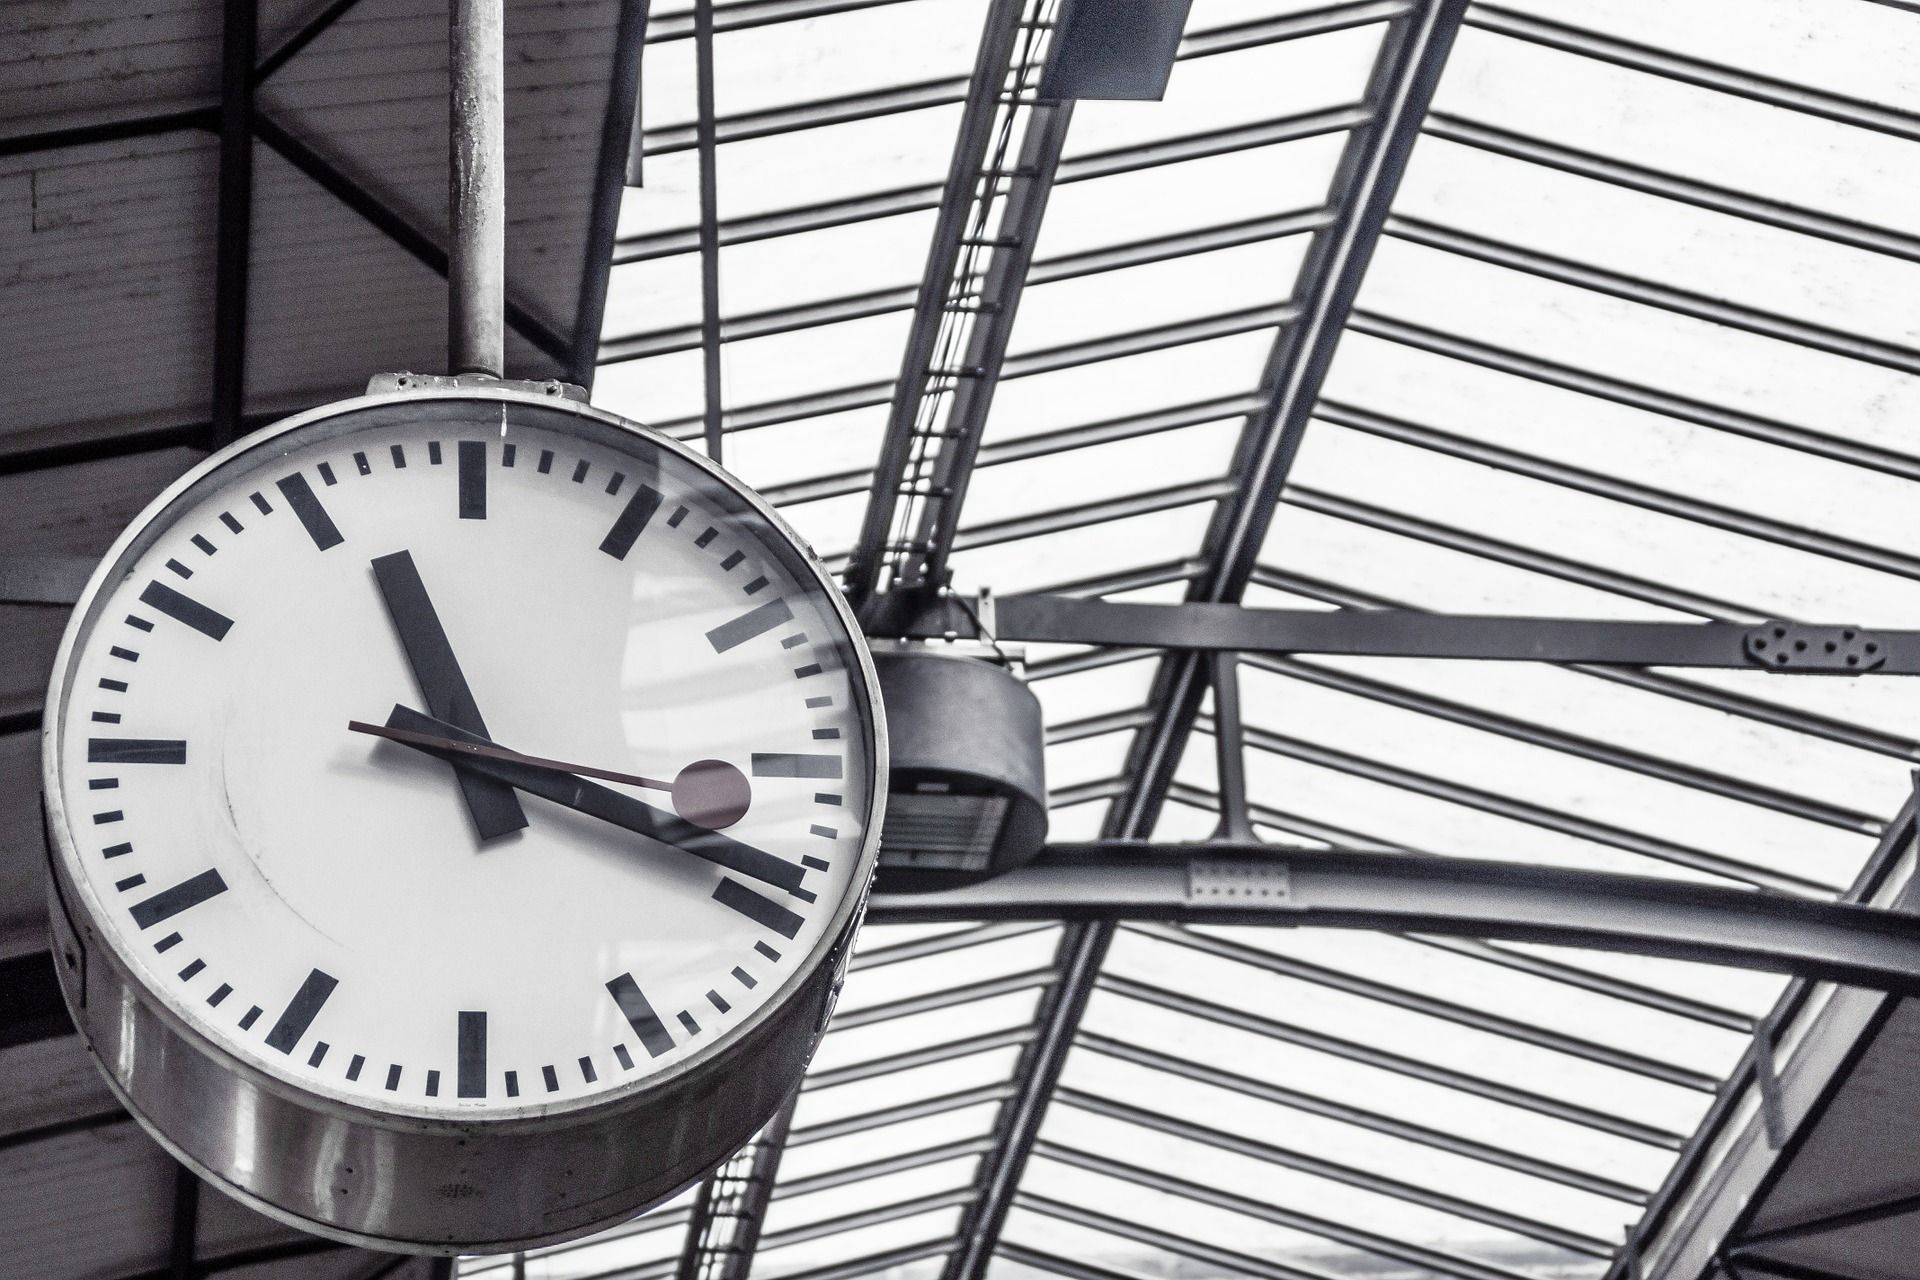 Clock in a train station